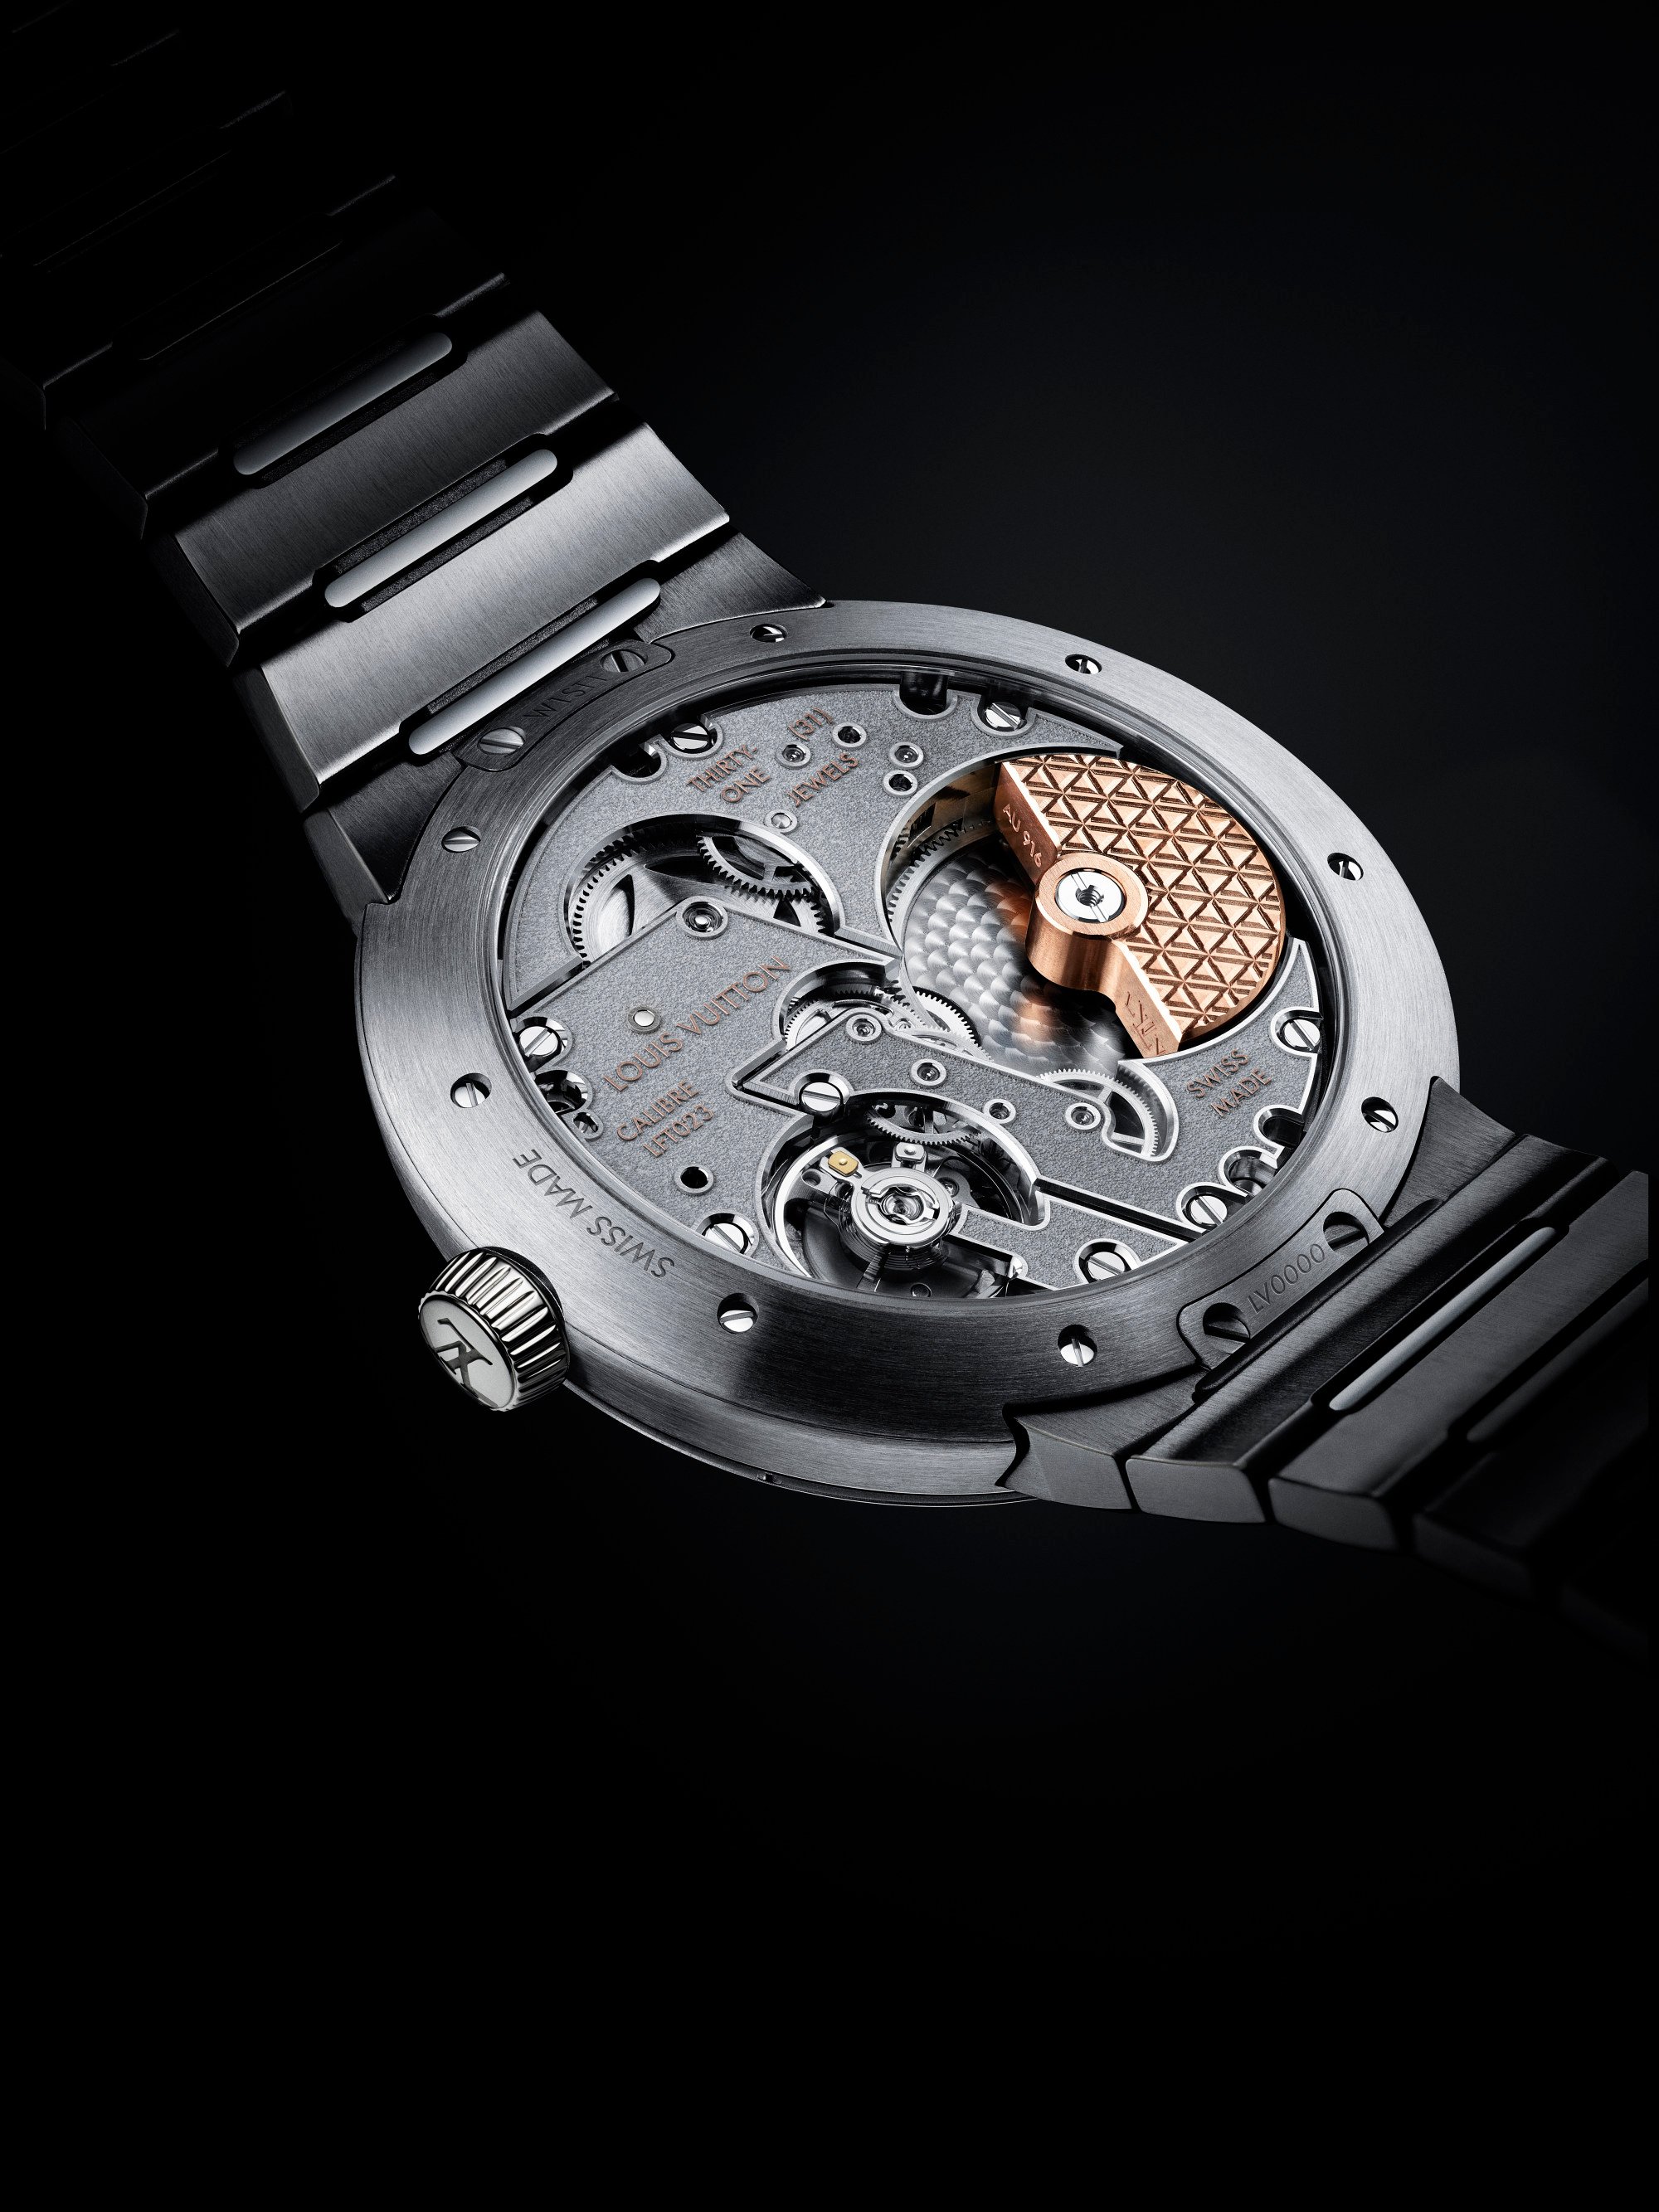 Louis Vuitton Pushes Watchmaking Credentials With Tambour Carpe